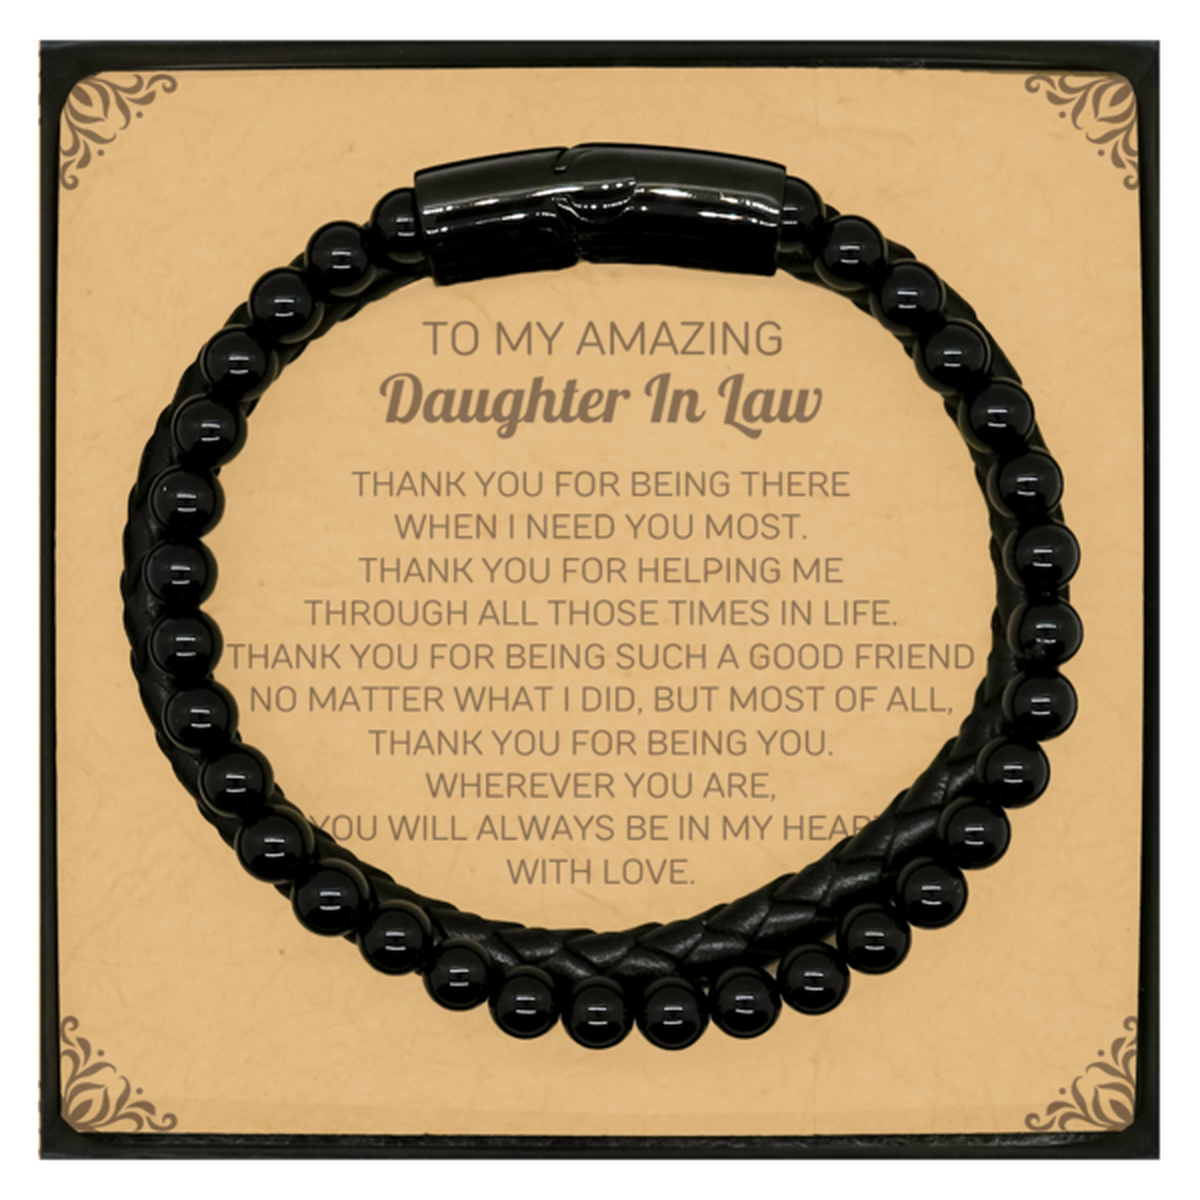 To My Amazing Daughter In Law Stone Leather Bracelets, Thank you for being there, Thank You Gifts For Daughter In Law, Birthday, Christmas Unique Gifts For Daughter In Law